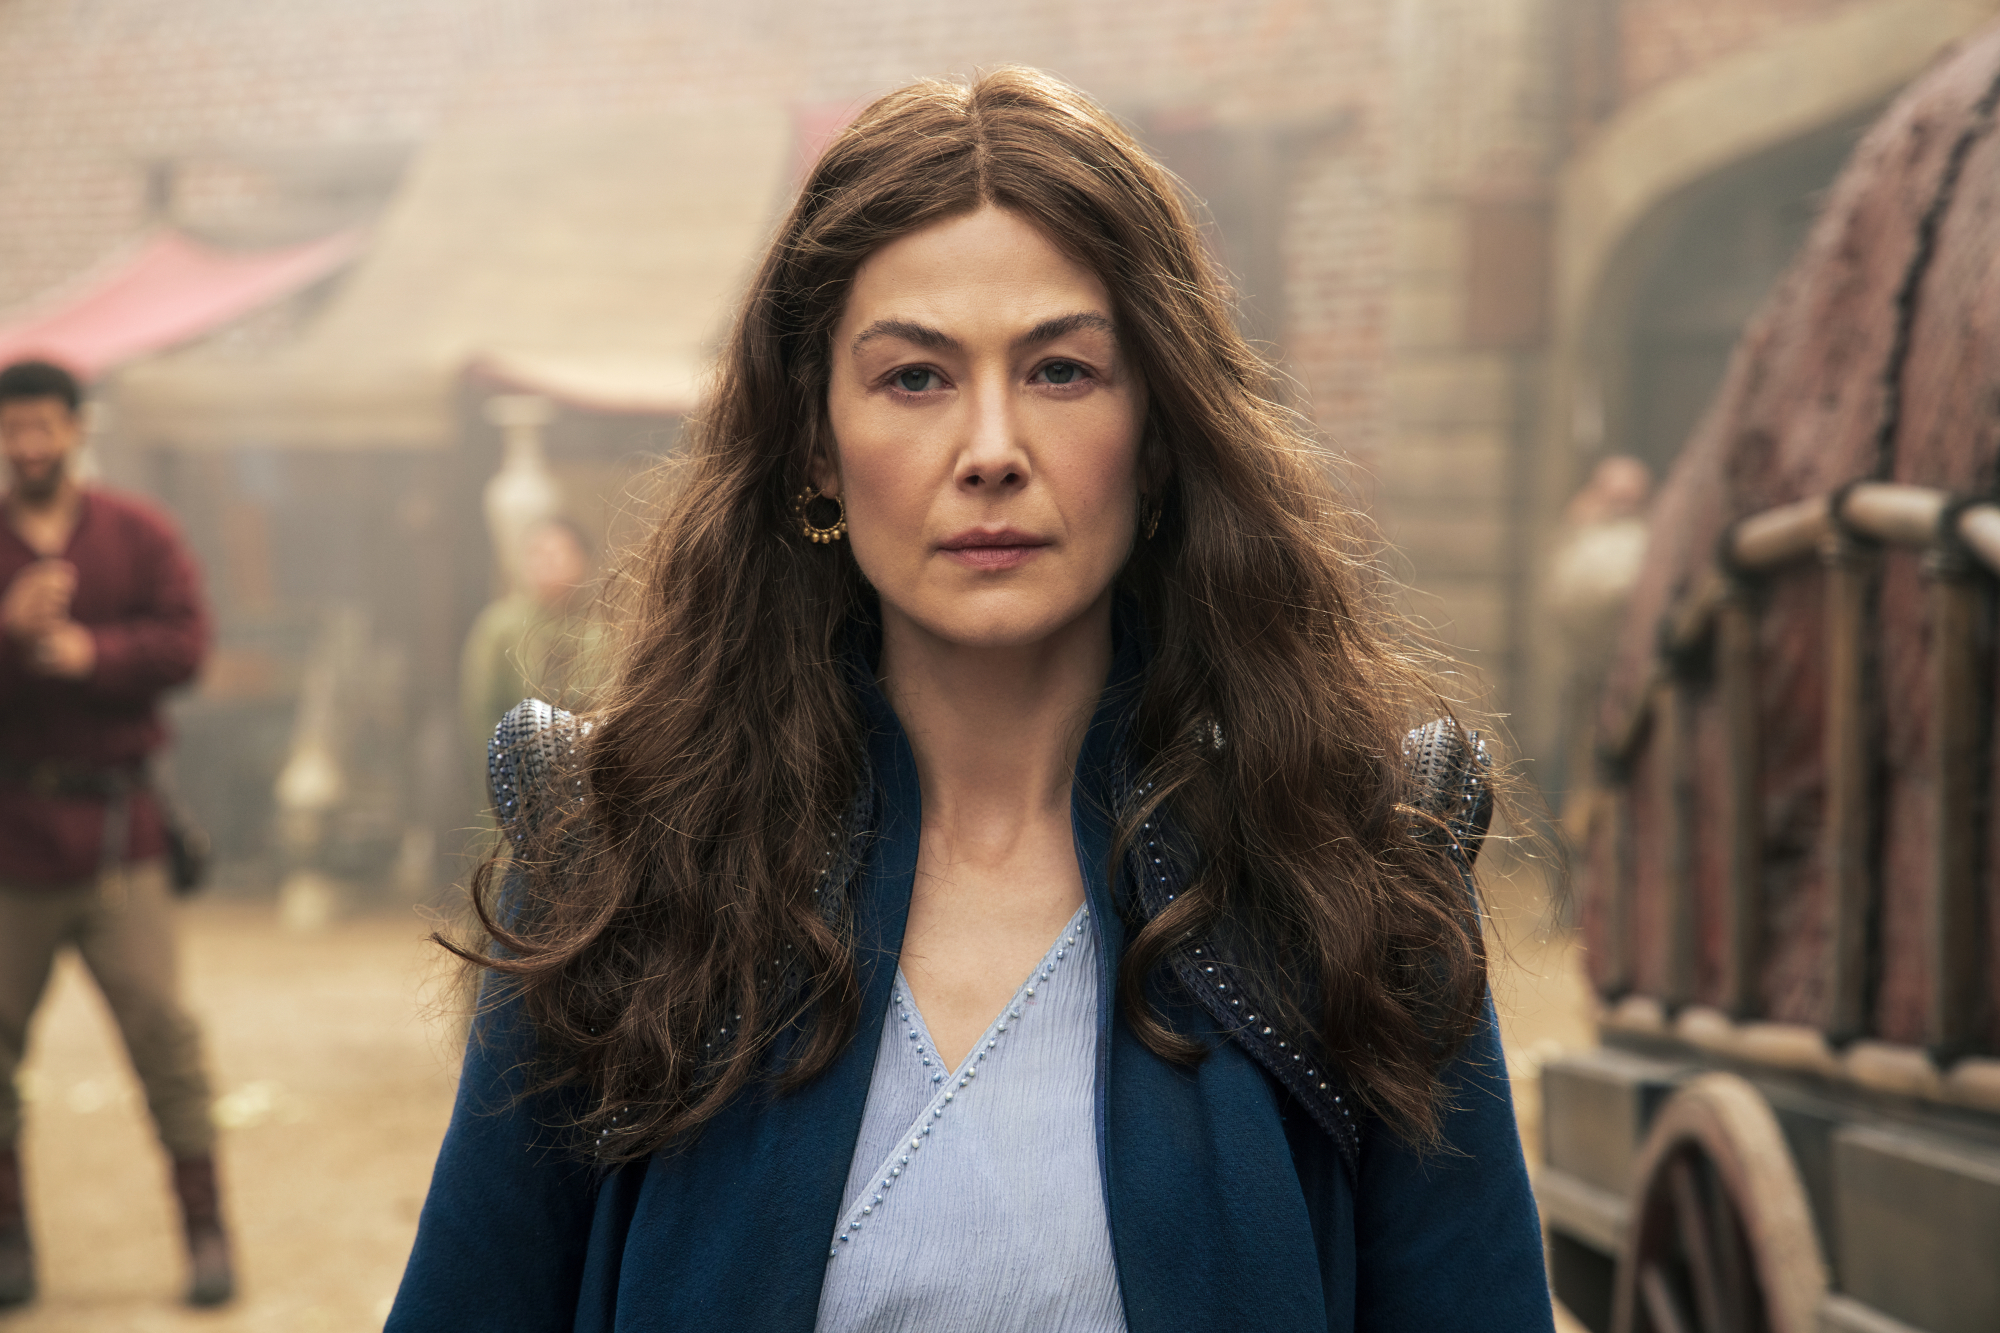 Rosamund Pike as Moiraine Damodred in 'The Wheel of Time,' which will receive a season 2 on Prime Video. She's staring directly at the camera, and there's a town behind her.